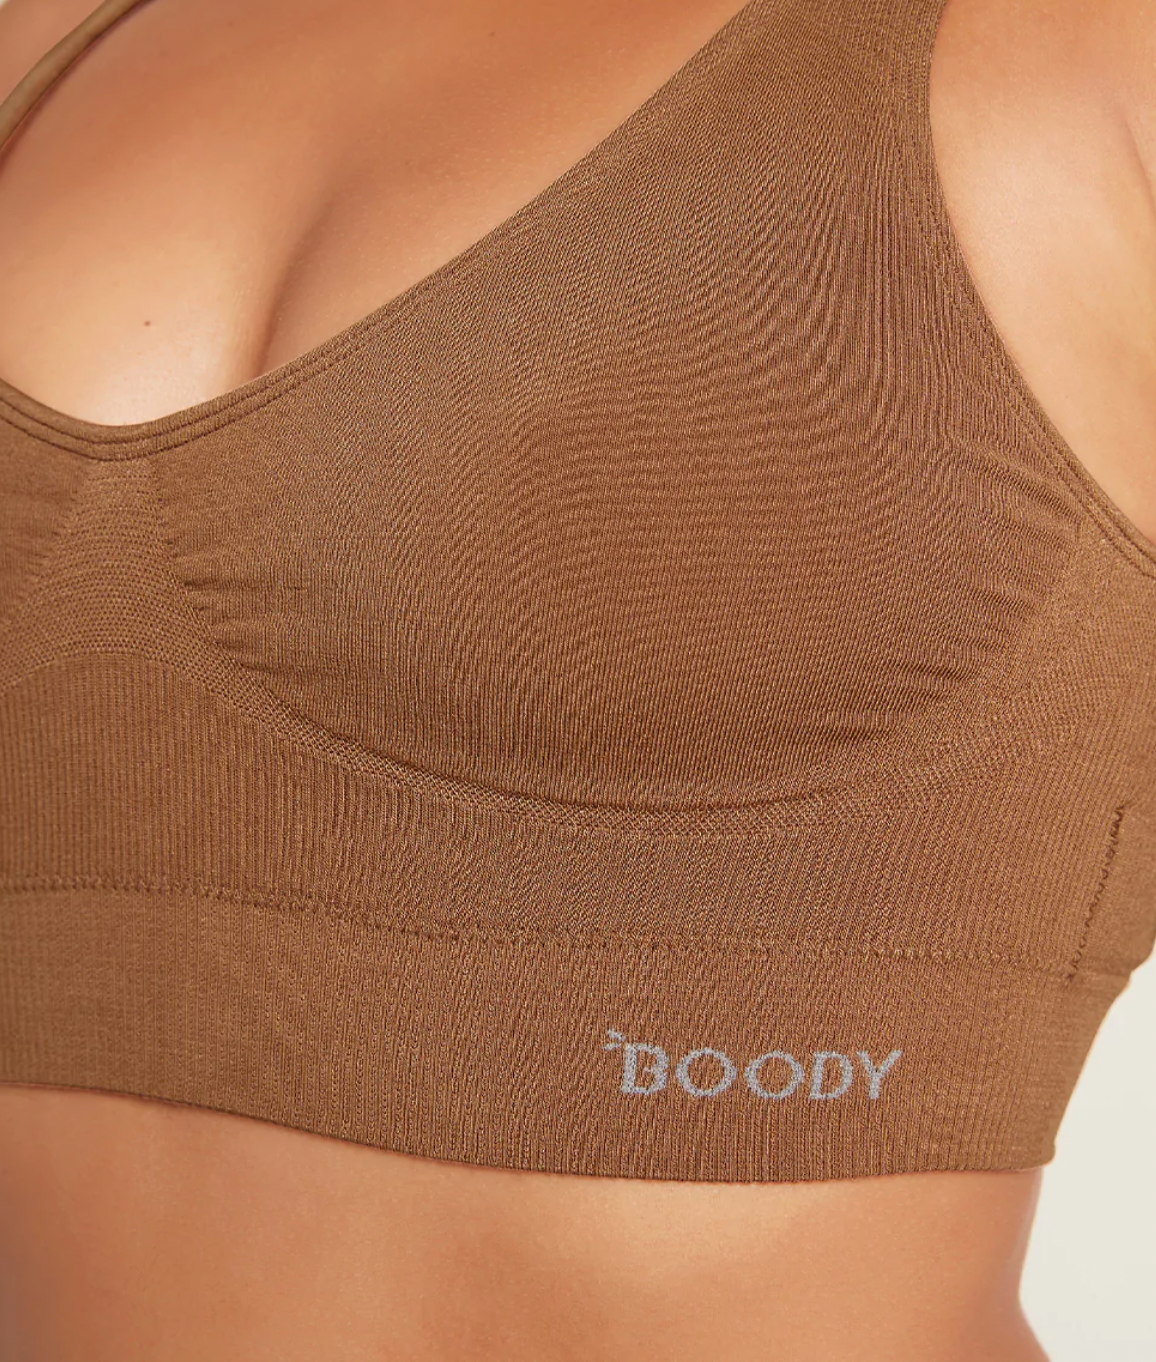 Boody 5-Pack Padded Shaper Crop Bra by Boody Online, THE ICONIC